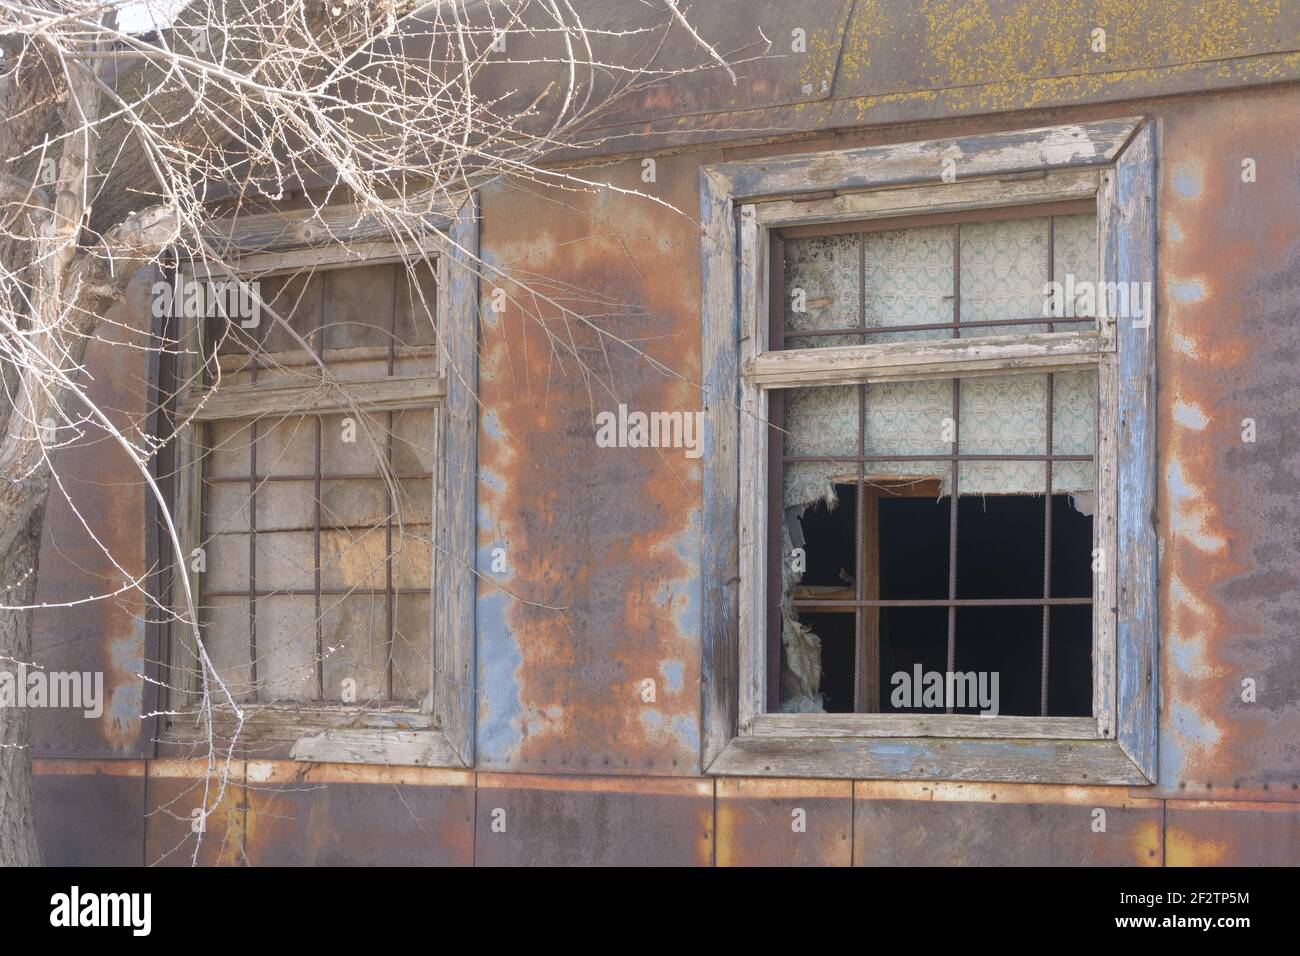 Old windows with iron bars on facade of abandoned caravan building. Rust and peeling paint on walls of facade. Stock Photo